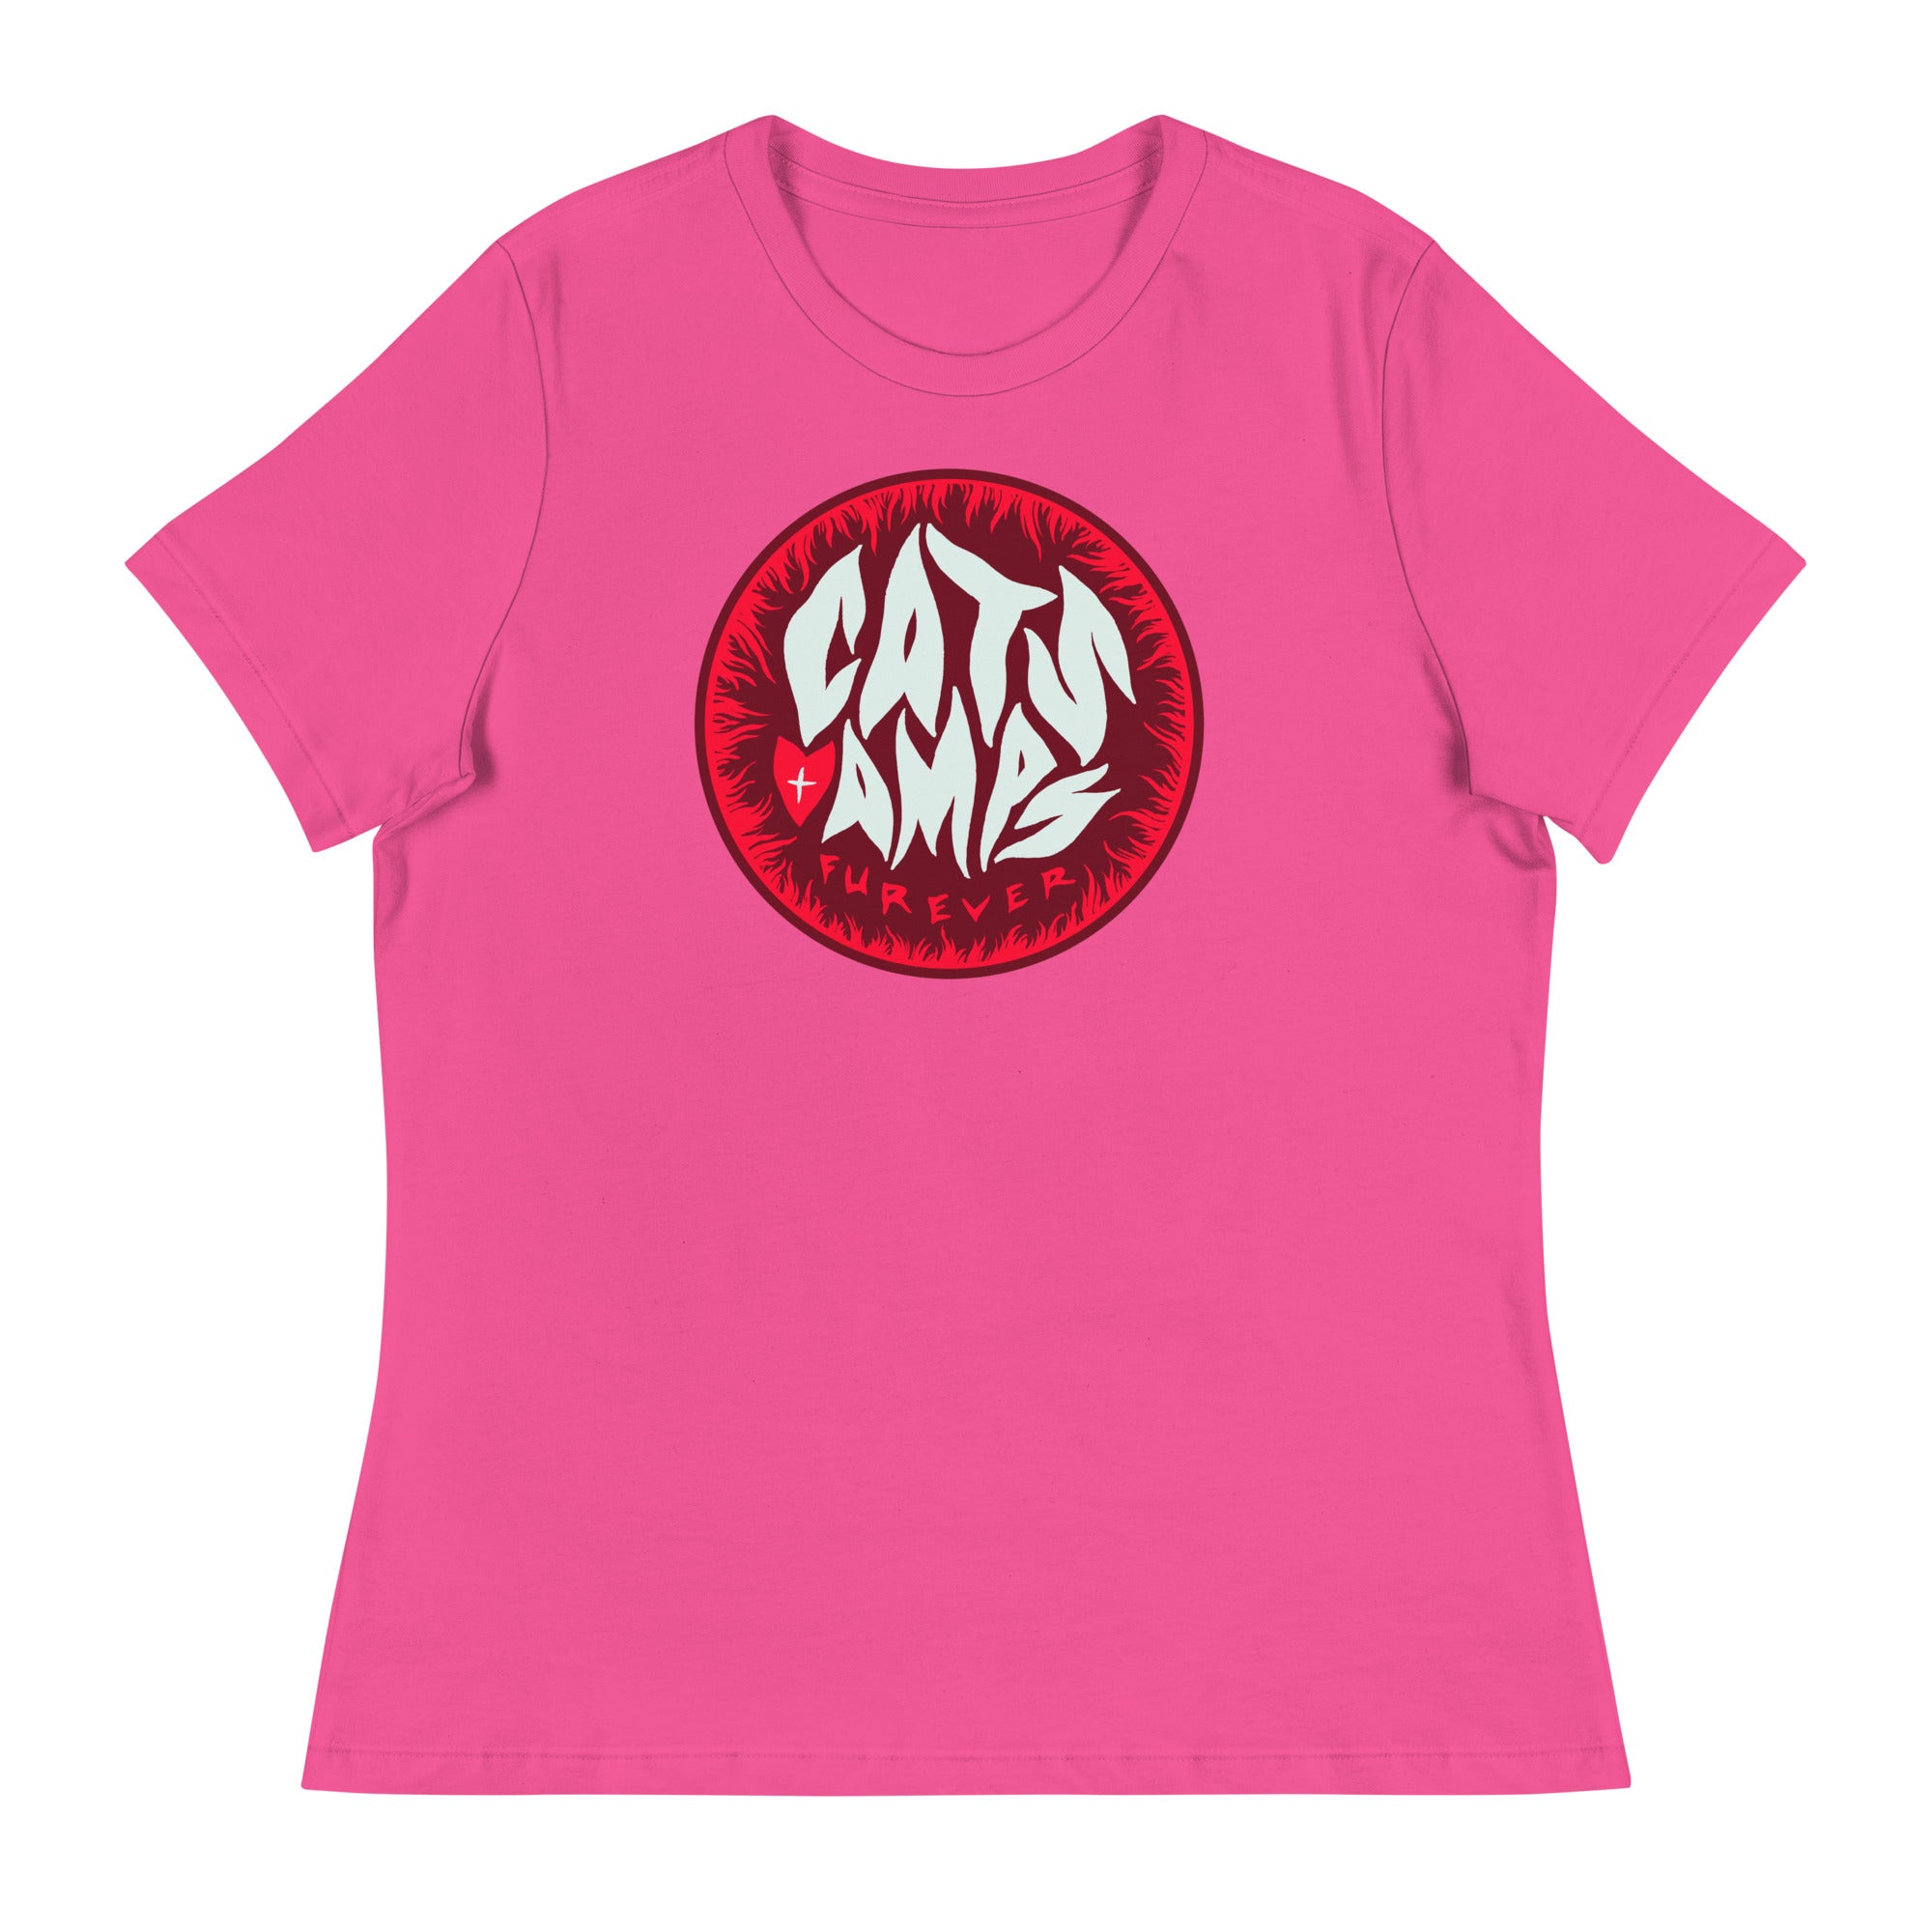 CATS ON AMPS - Valentine Furever - Women's Relaxed T-Shirt